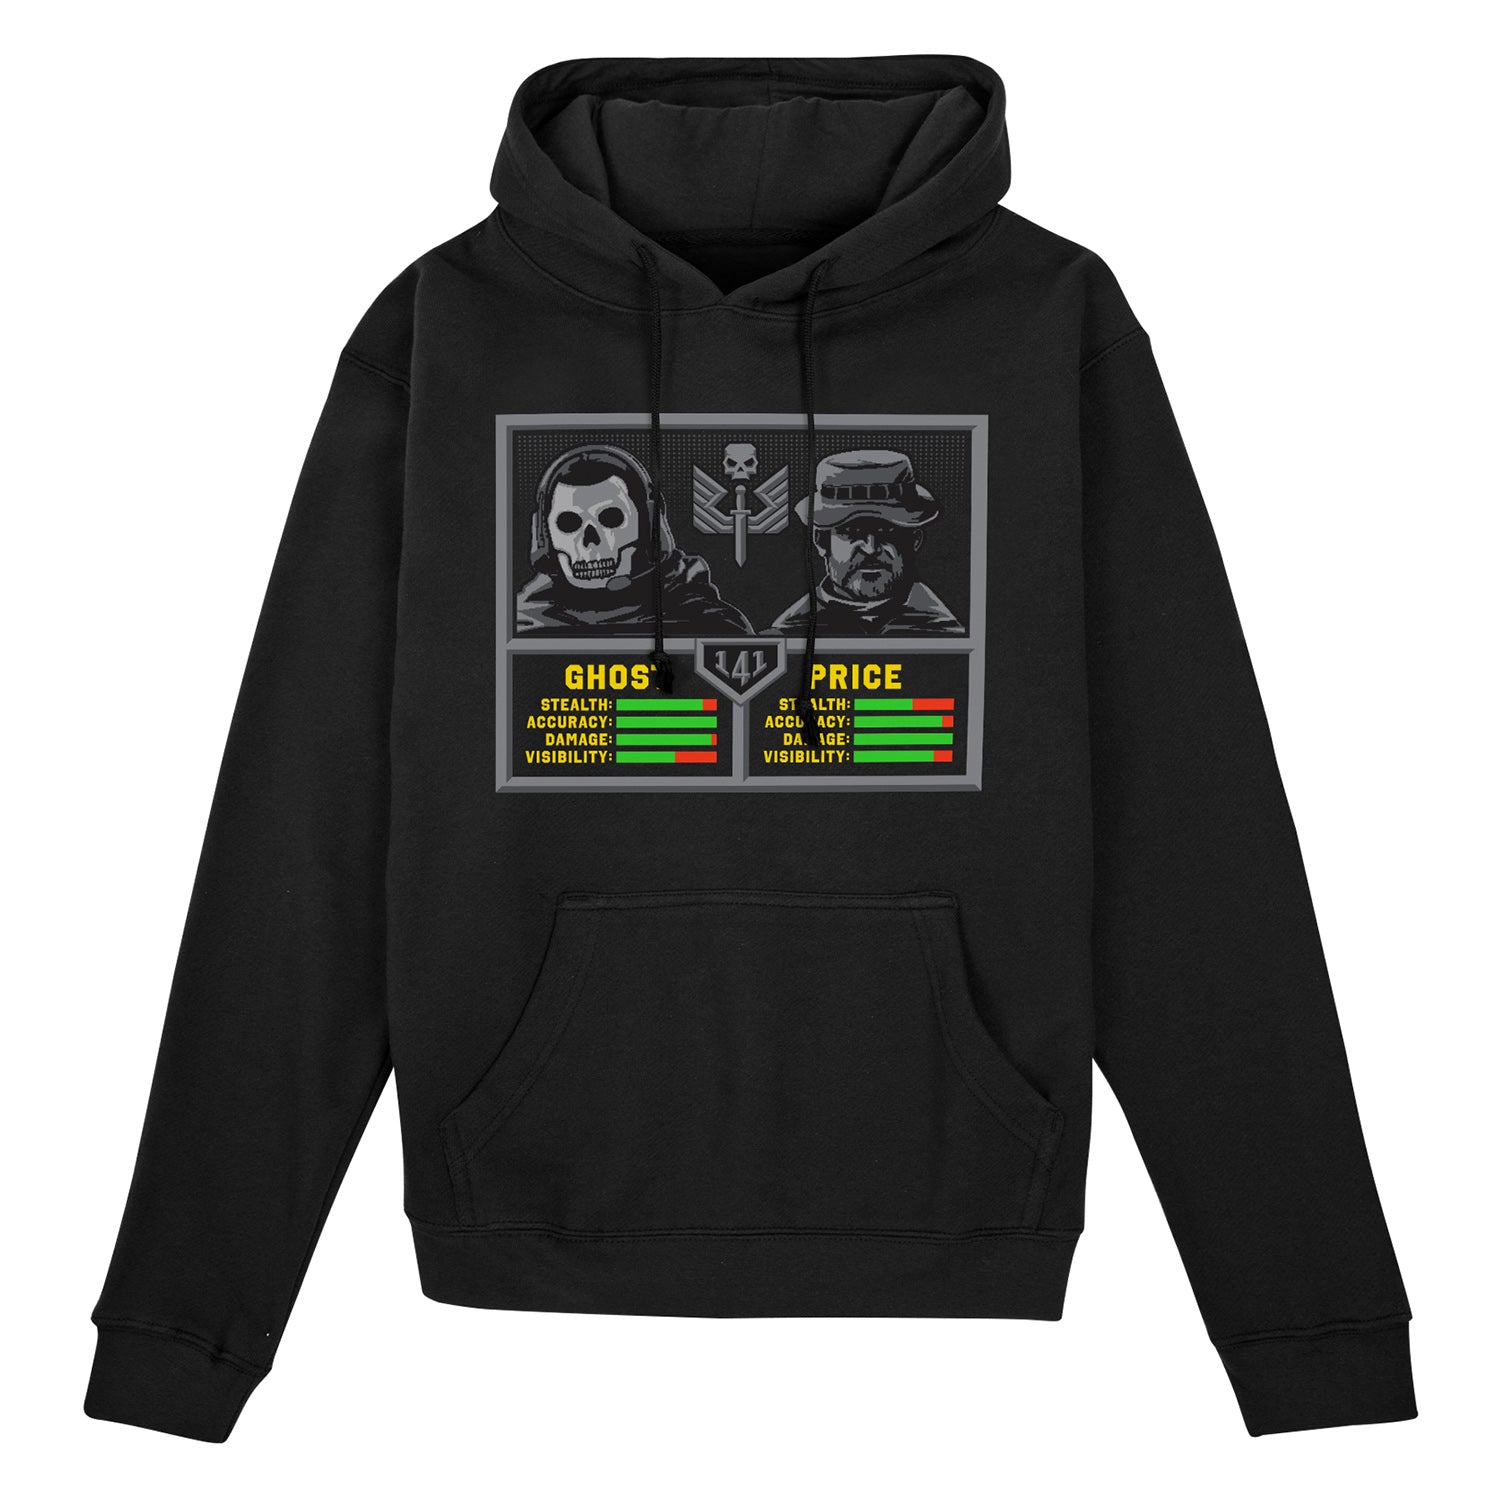 Call of Duty Black 141 Jam Hoodie - Front View